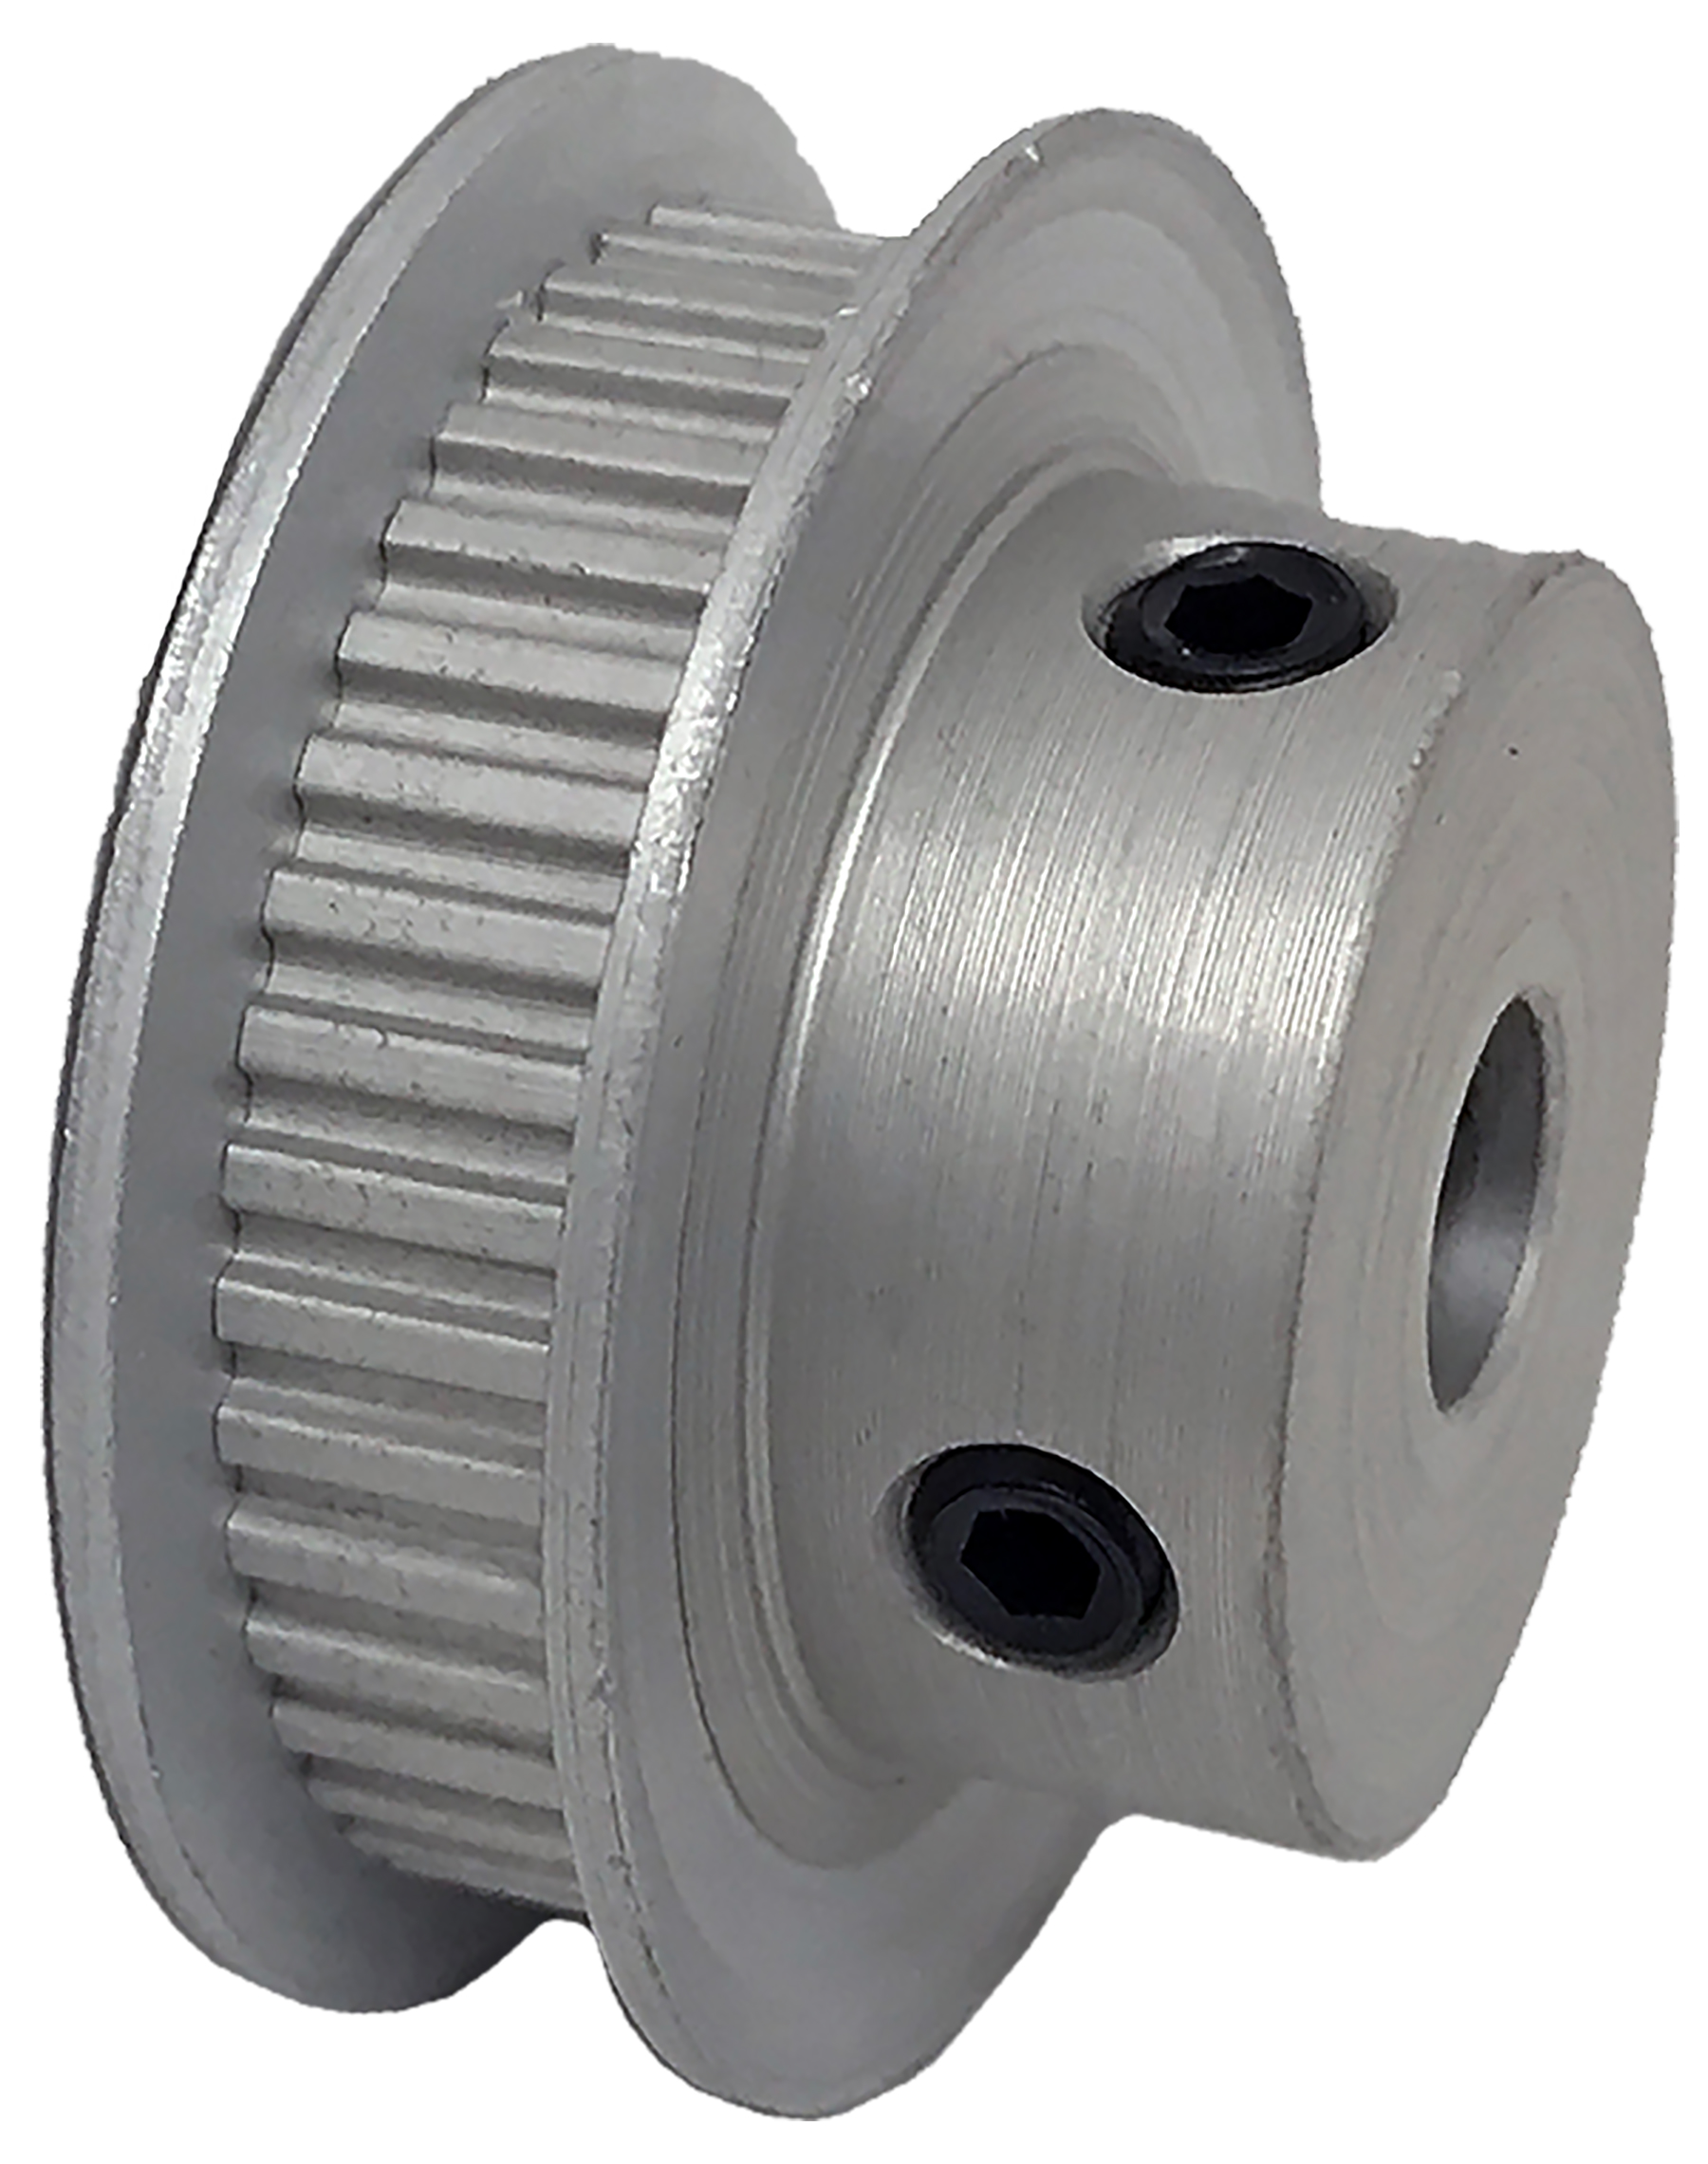 42LT187-6FA3 - Aluminum Imperial Pitch Pulleys